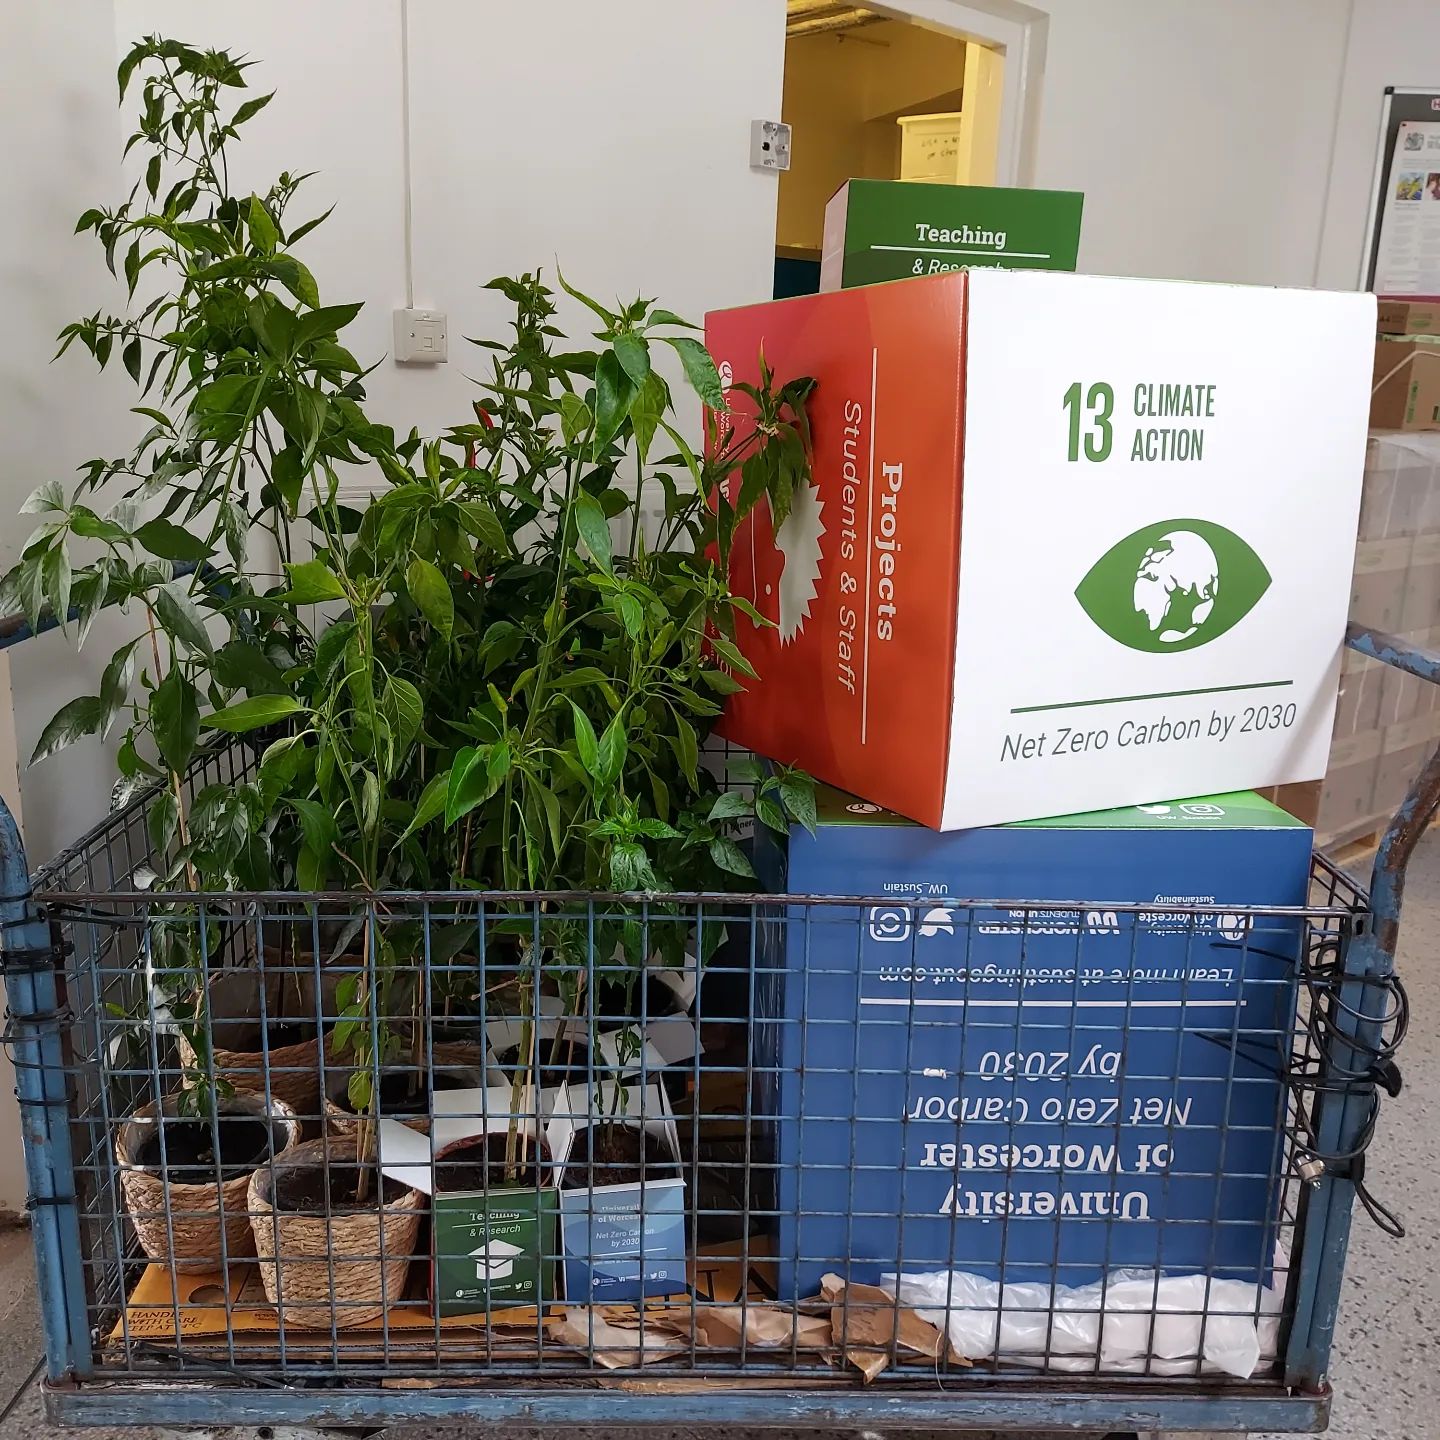 Trolley loaded....getting ready to set up for the #sustainability #greenimpact awards. Good luck everyone. @worcsu @uow_sustainability_network @uow_womensnetwork @worcesterunifood @worcester_uni . Can't wait for the special vegan moussaka lunch